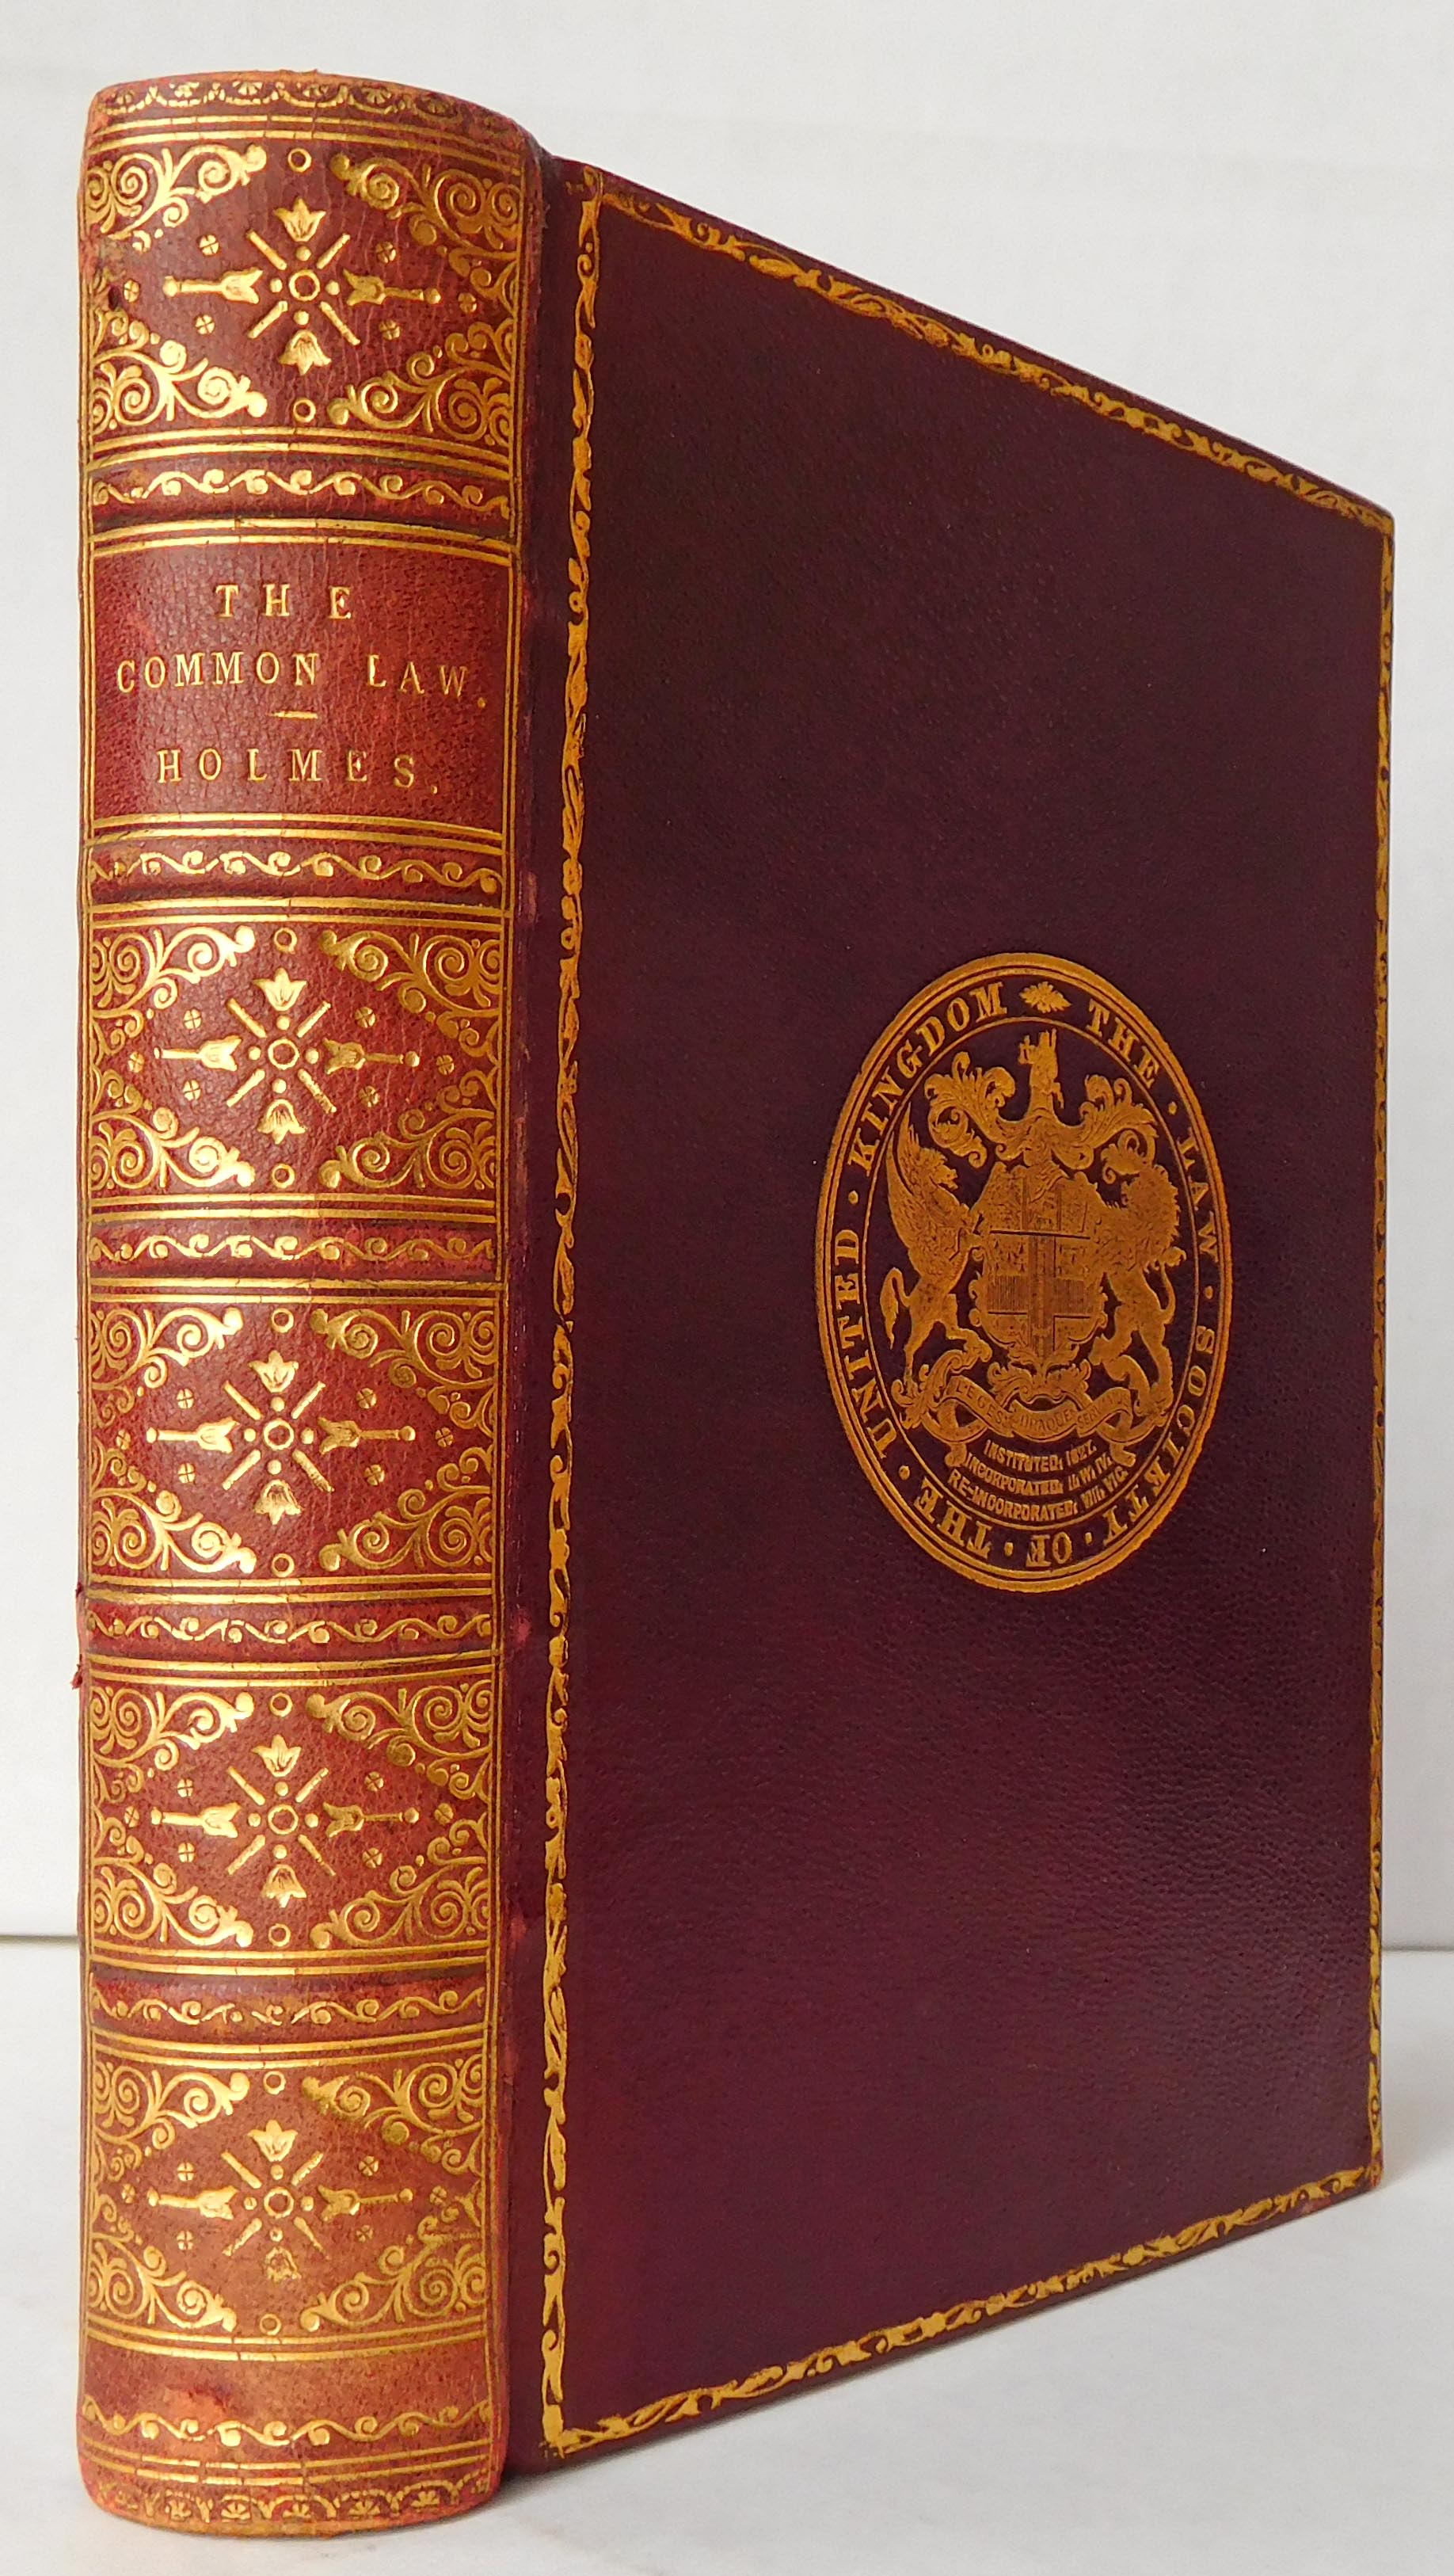 Holmes, Oliver Wendell - The Common Law [a prize binding presented by The Honorable Society of Clements Inn to Arthur Wansbrough Jones, who placed first in first class at the examination held in January, 1889; with the seal of the Inn, in gilt, on the front board]